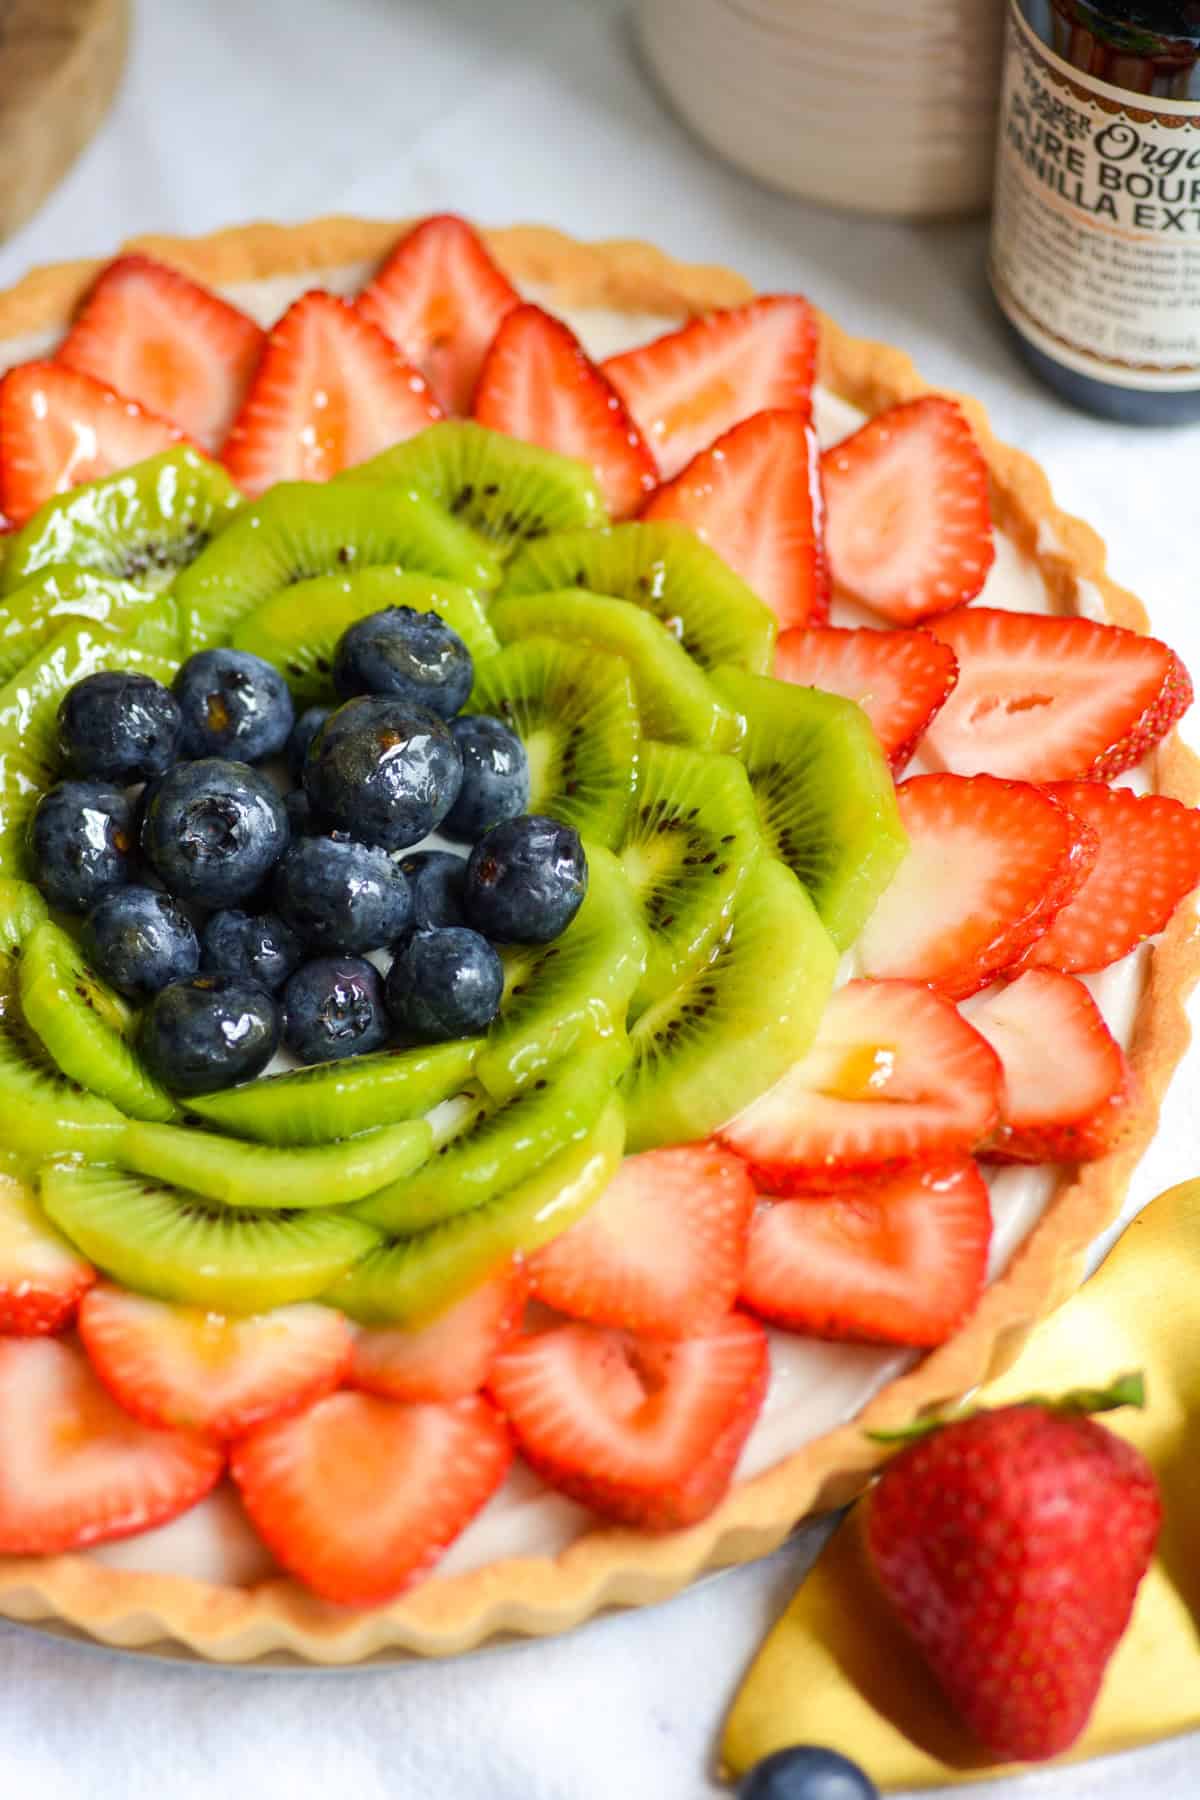 Vegan fruit tart that is topped with sliced strawberries, kiwi and blueberries on a white cloth with a strawberry in the foreground.